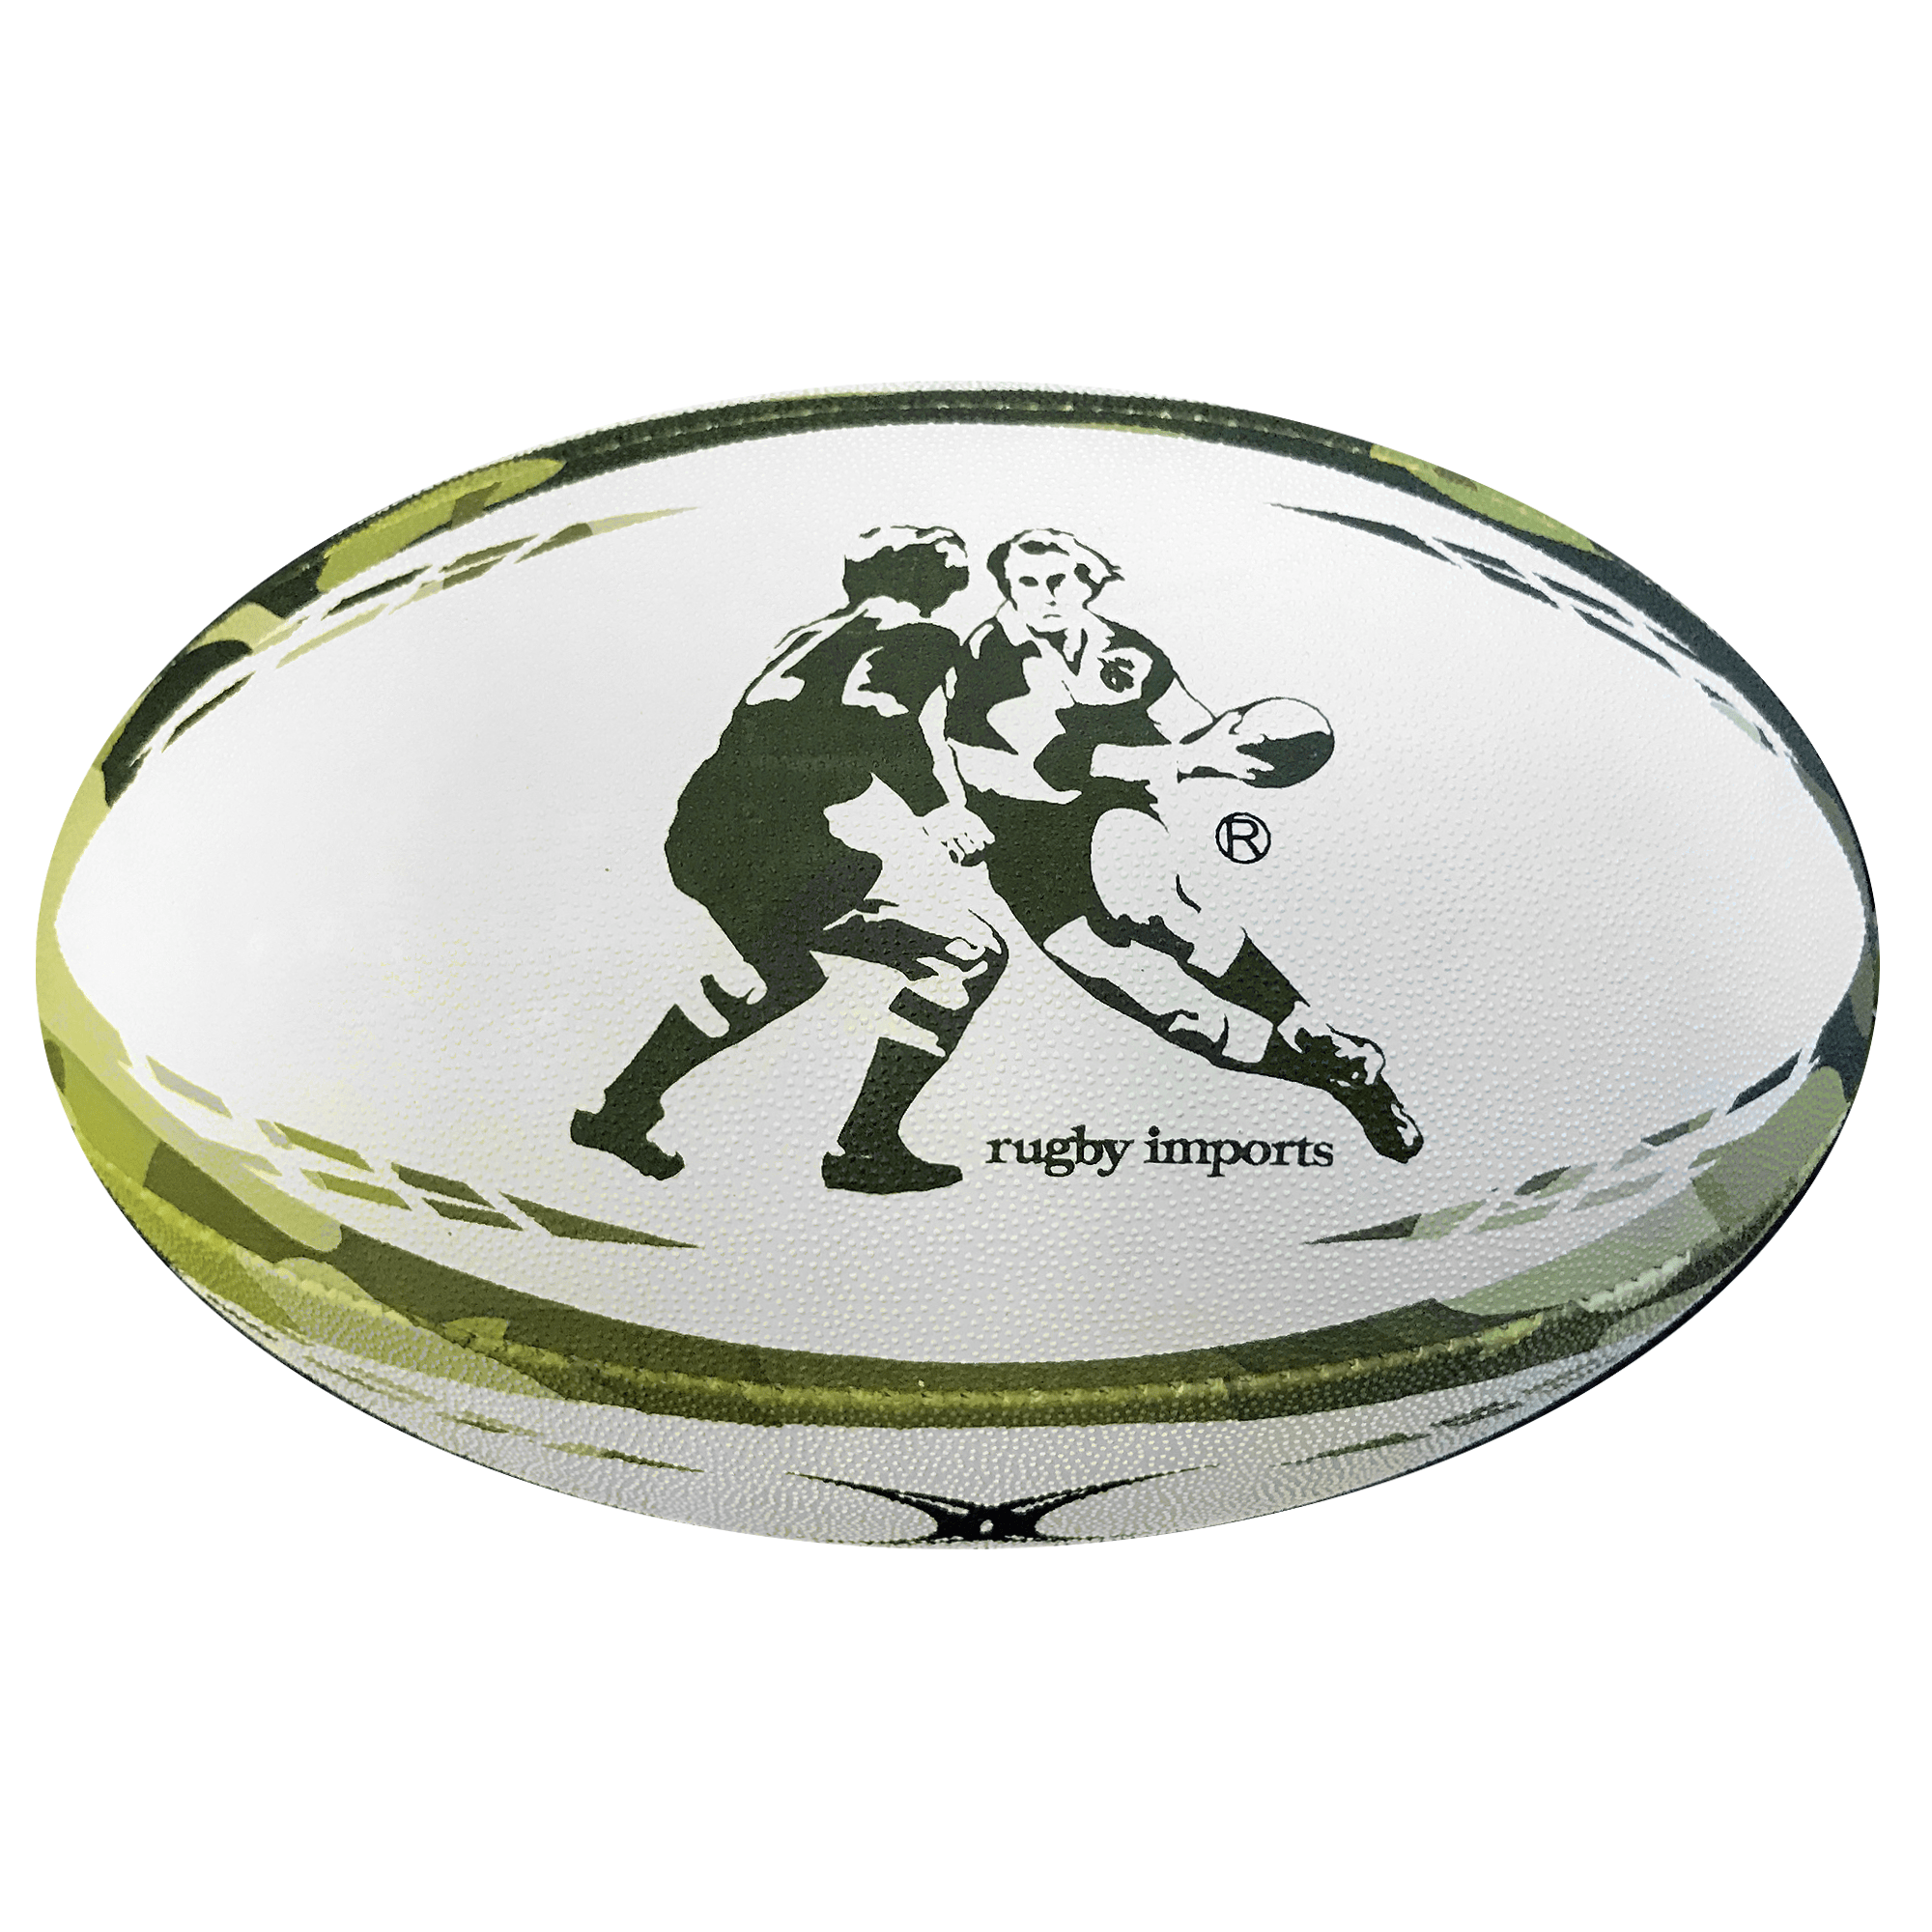 Gilbert Rugby Direct Rugby Balls Plus 5 - Standard Gilbert G-TR3000 Camo Rugby Training Ball